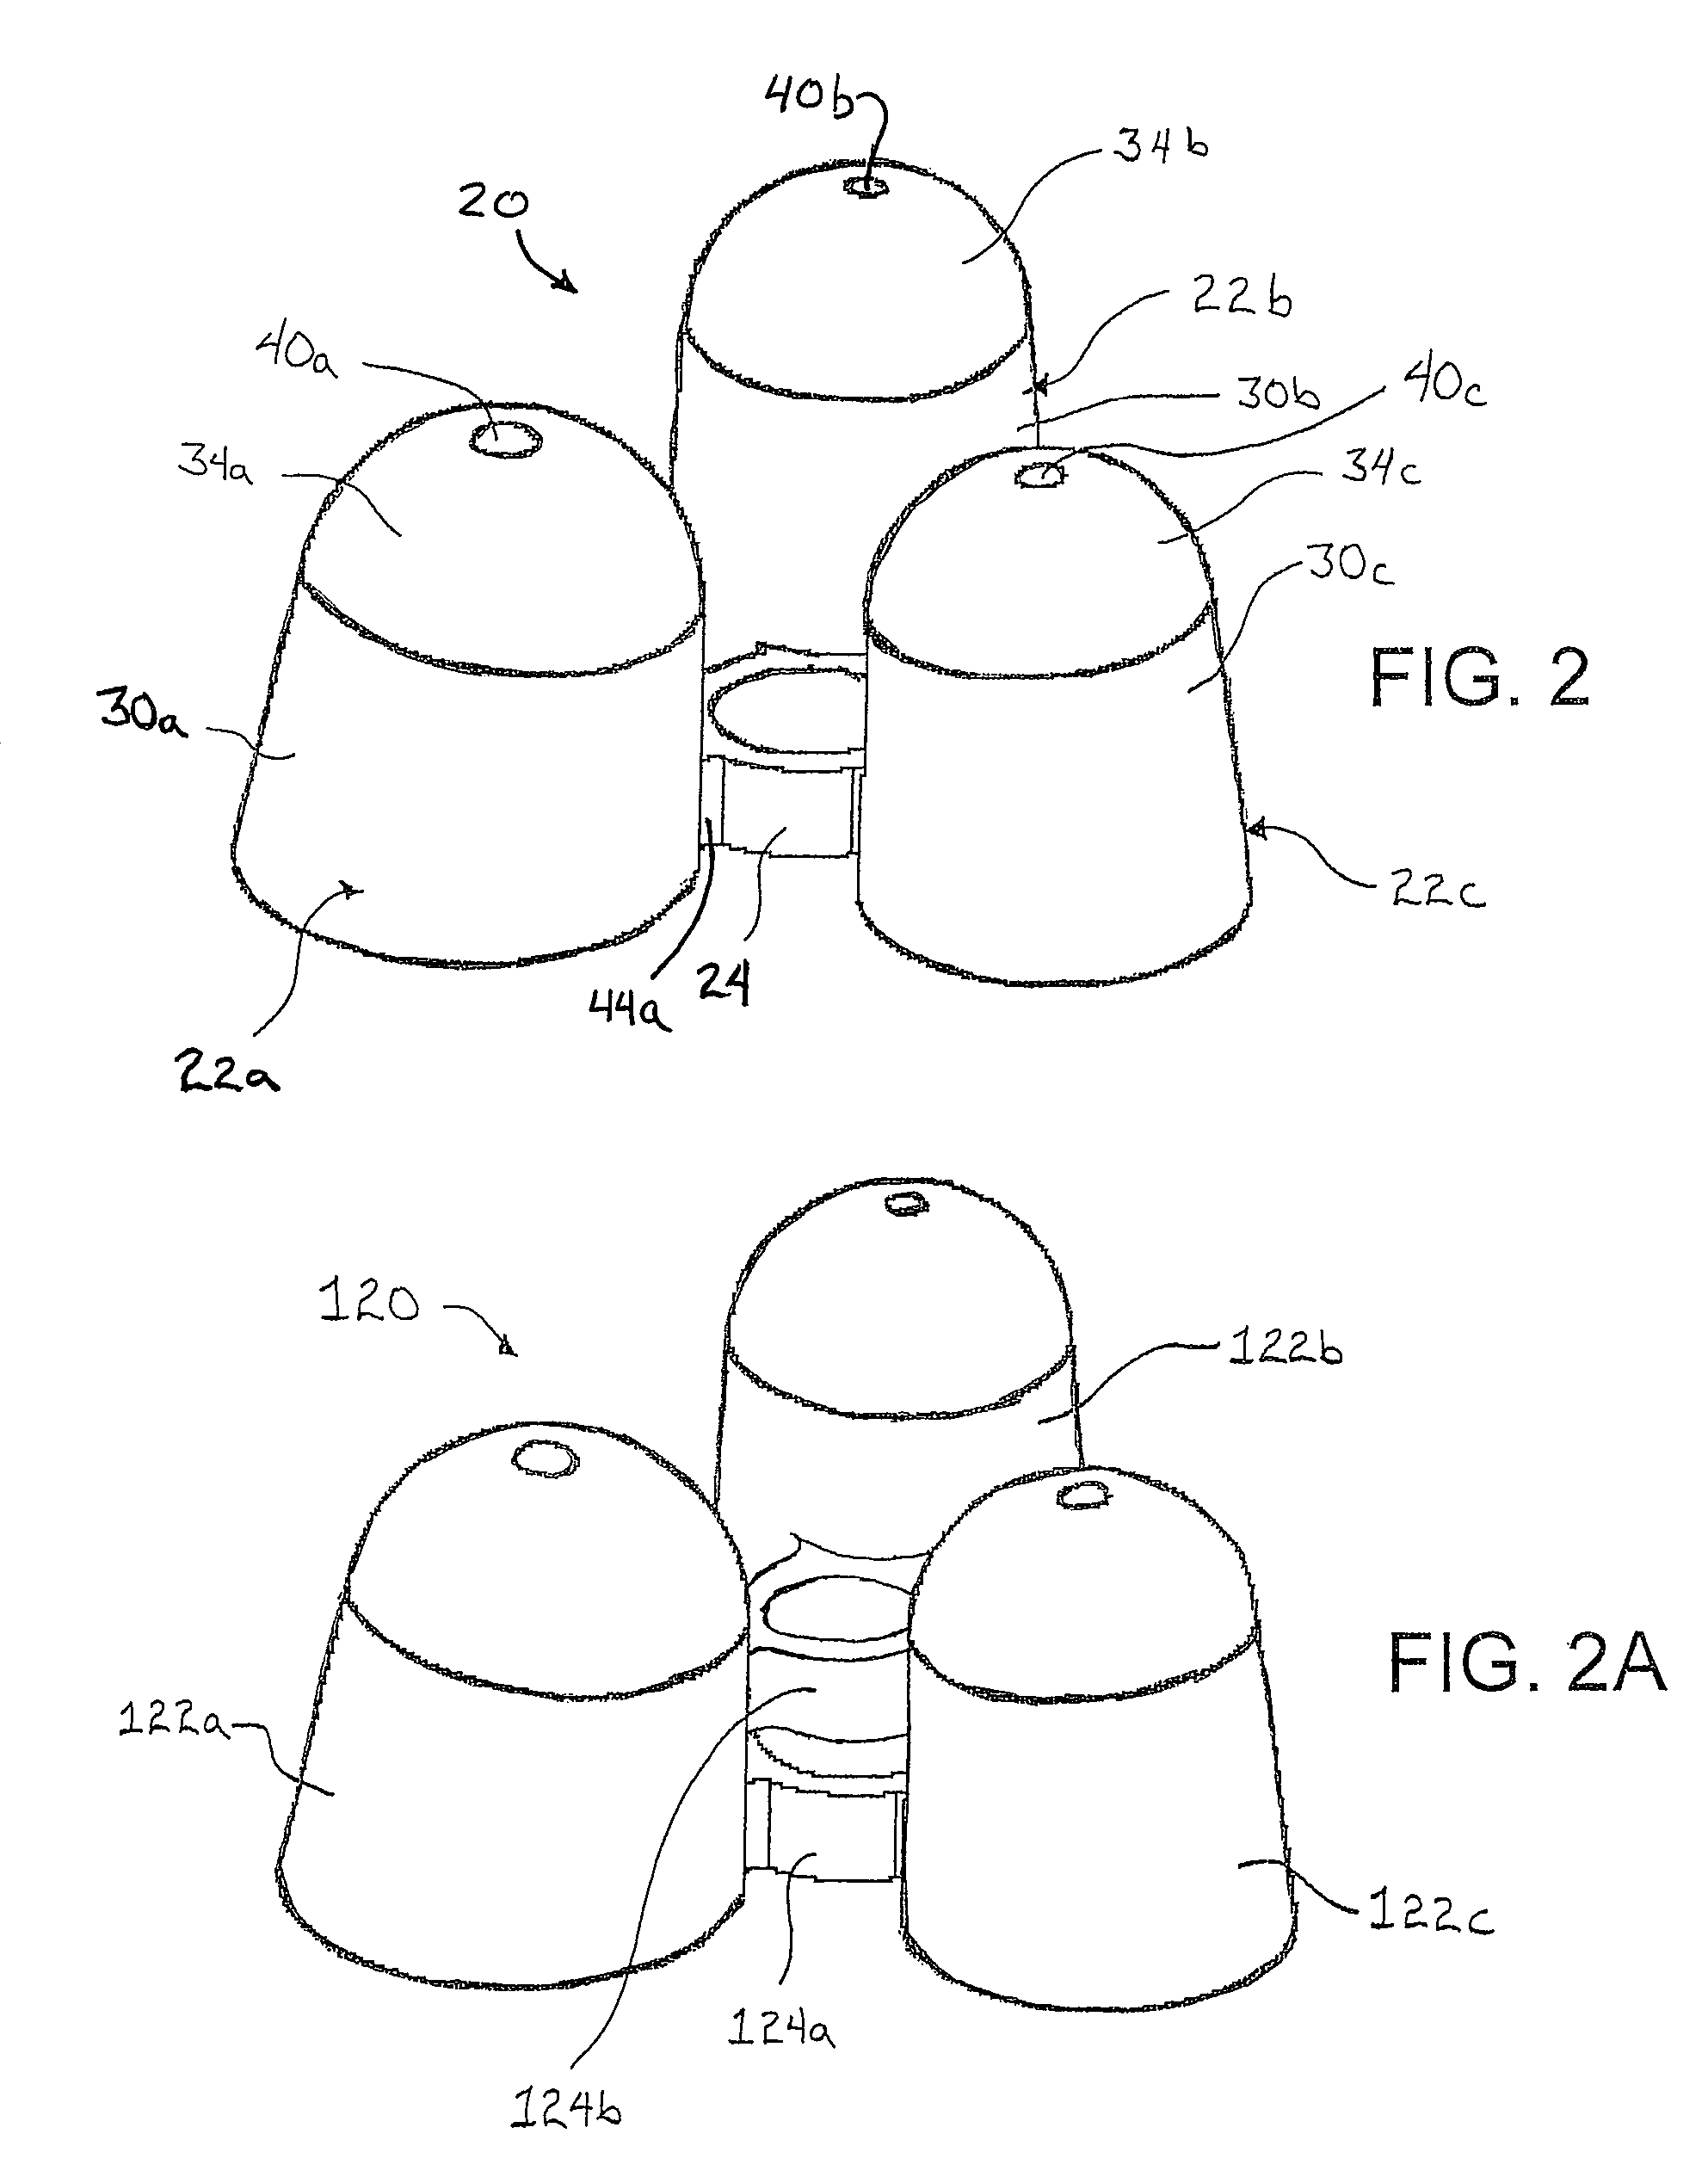 Writing implement holding device